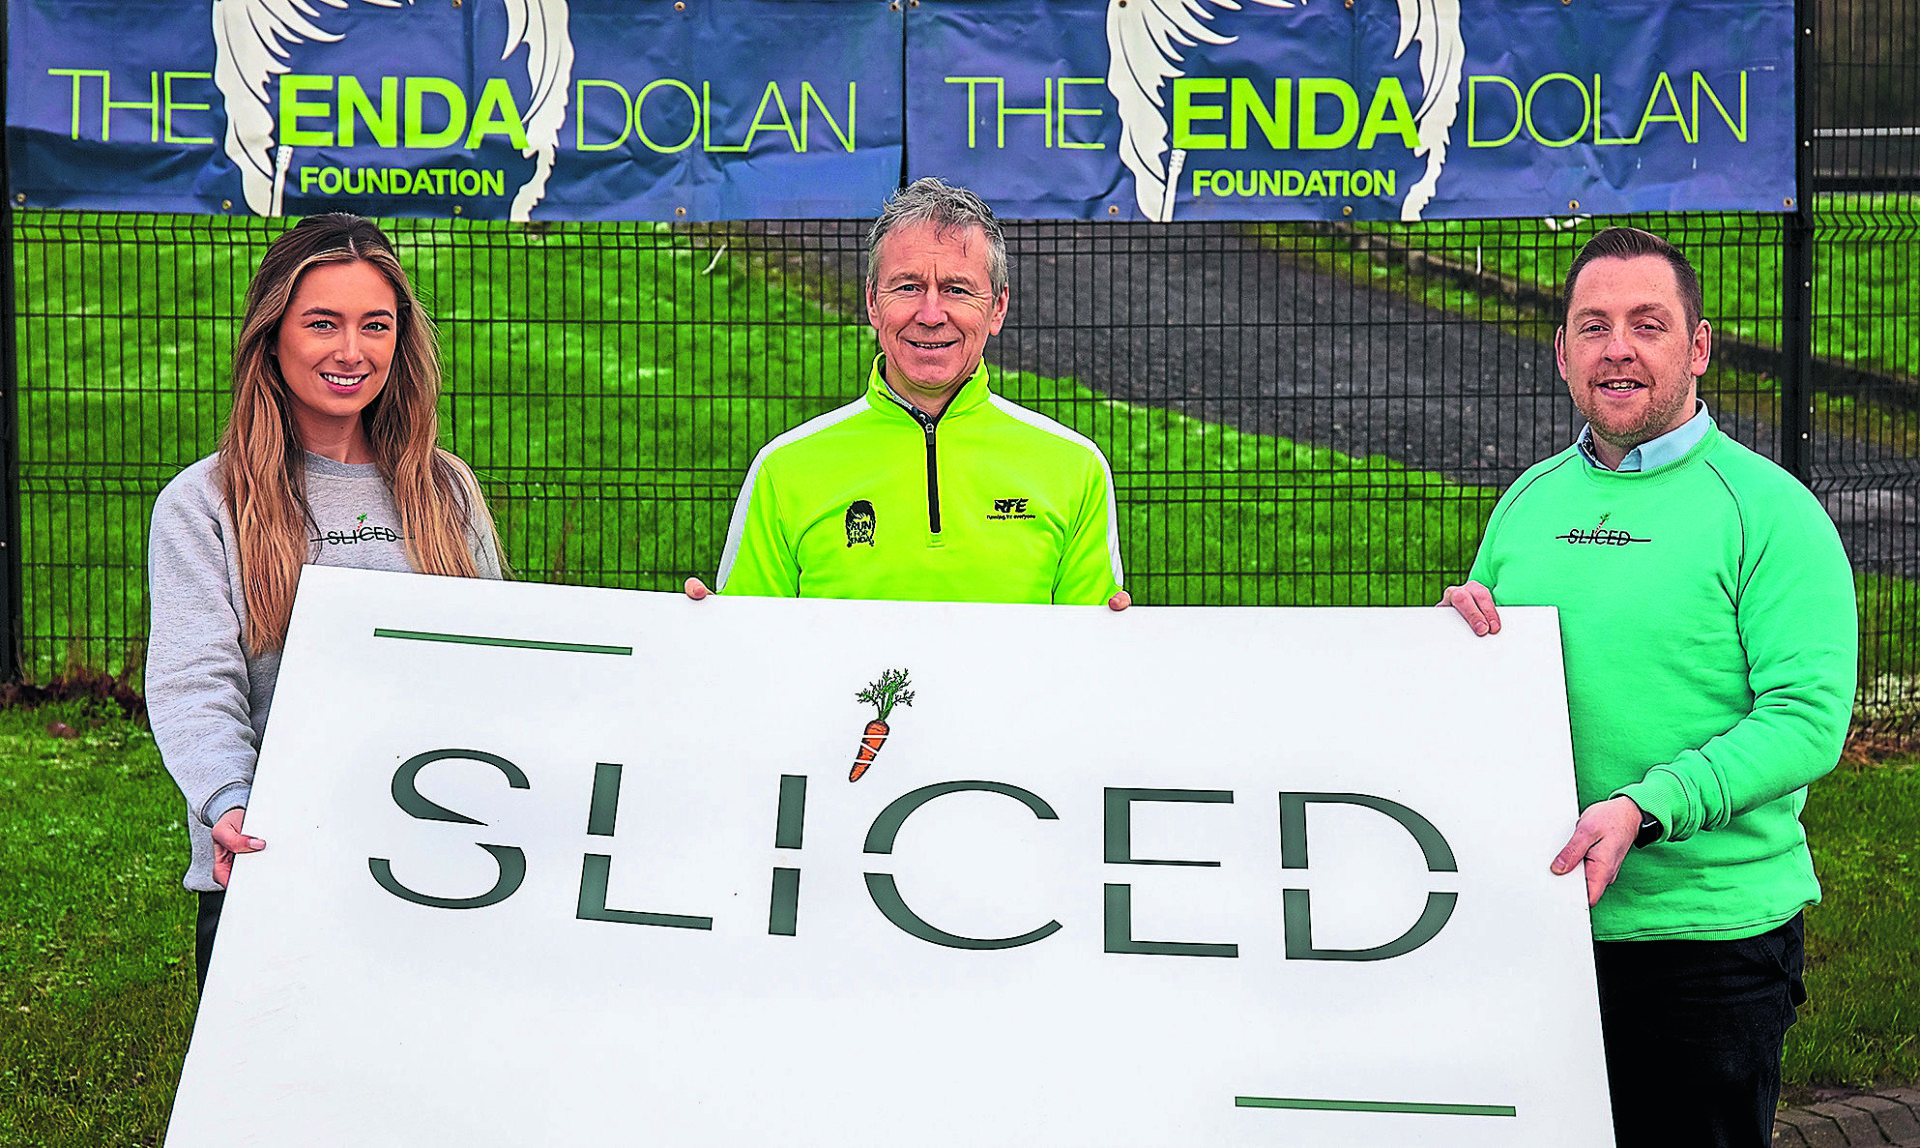 All systems go for 2022 Run for Enda training programme